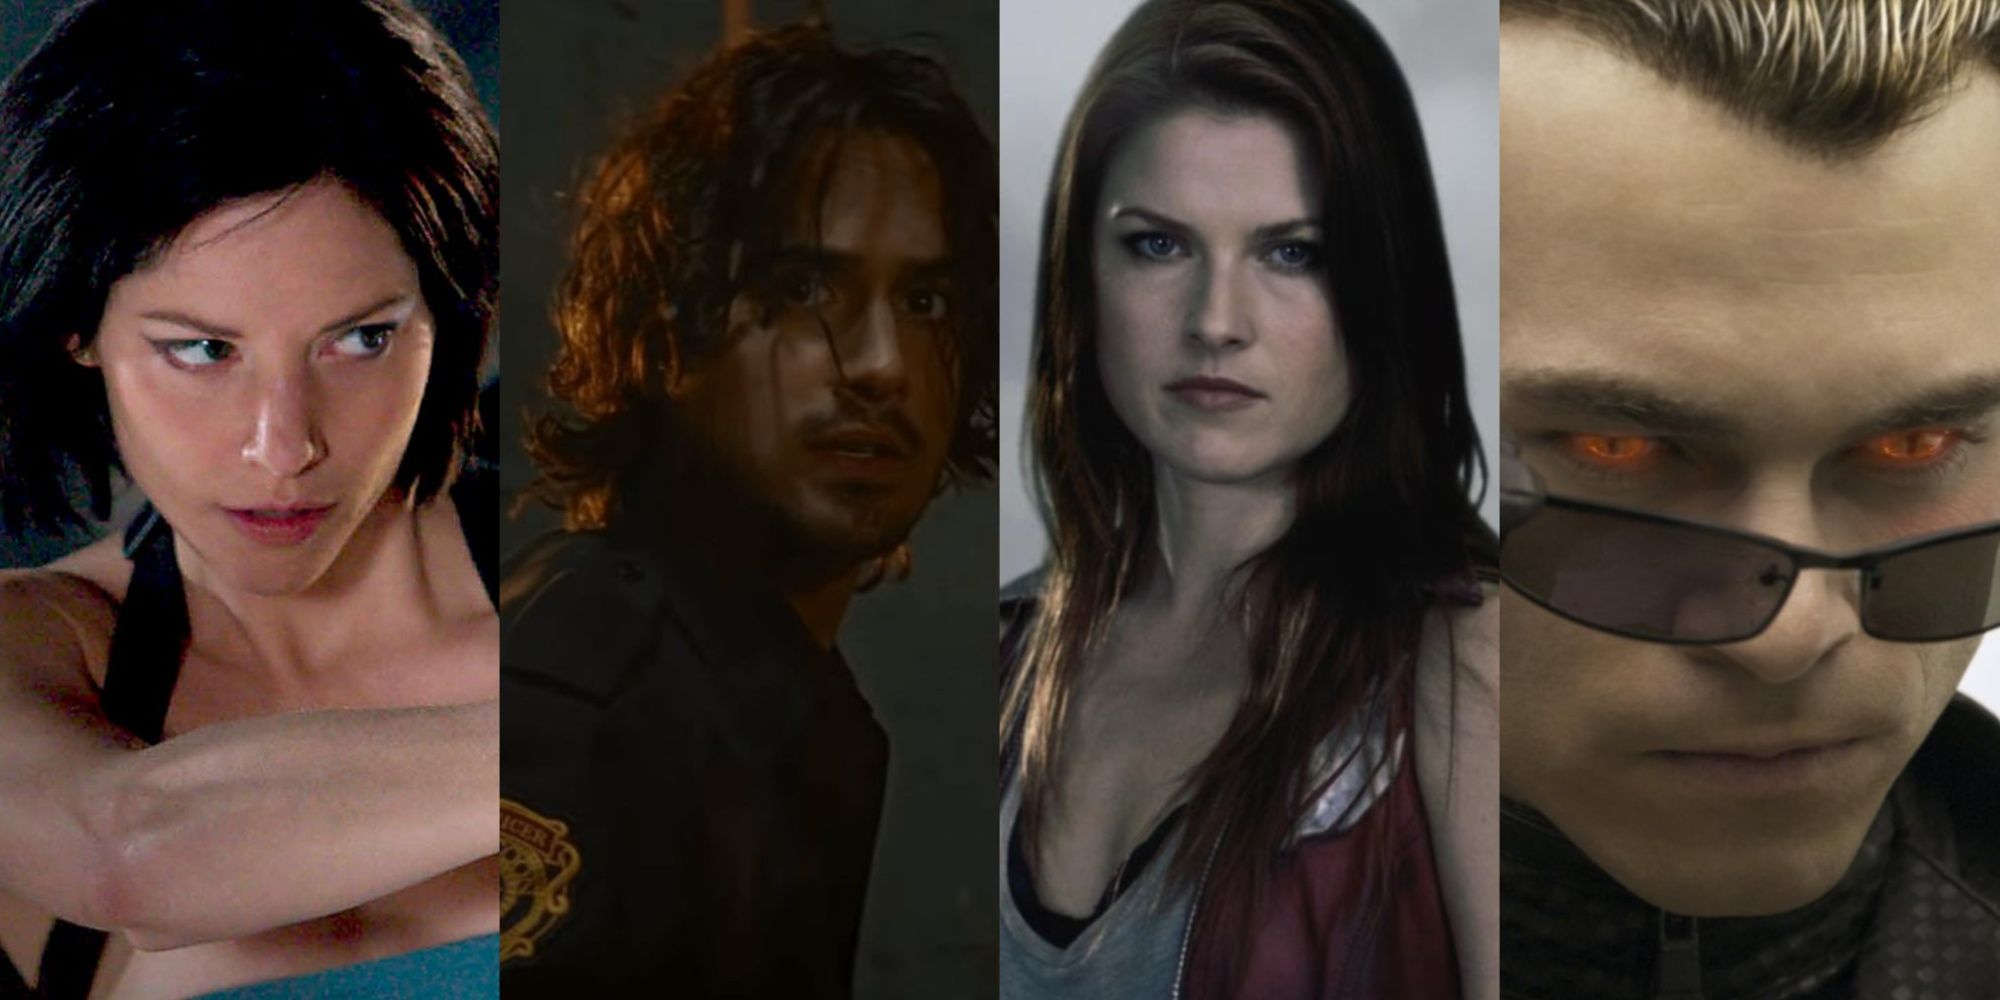 Four-image collage of Jill Valentine in Resident Evil: Apocalypse, Leon Kennedy in Resident Evil: Welcome To Raccoon City, Claire Redfield in Resident Evil: Afterlife, and Albert Wesker in Resident Evil: Afterlife.